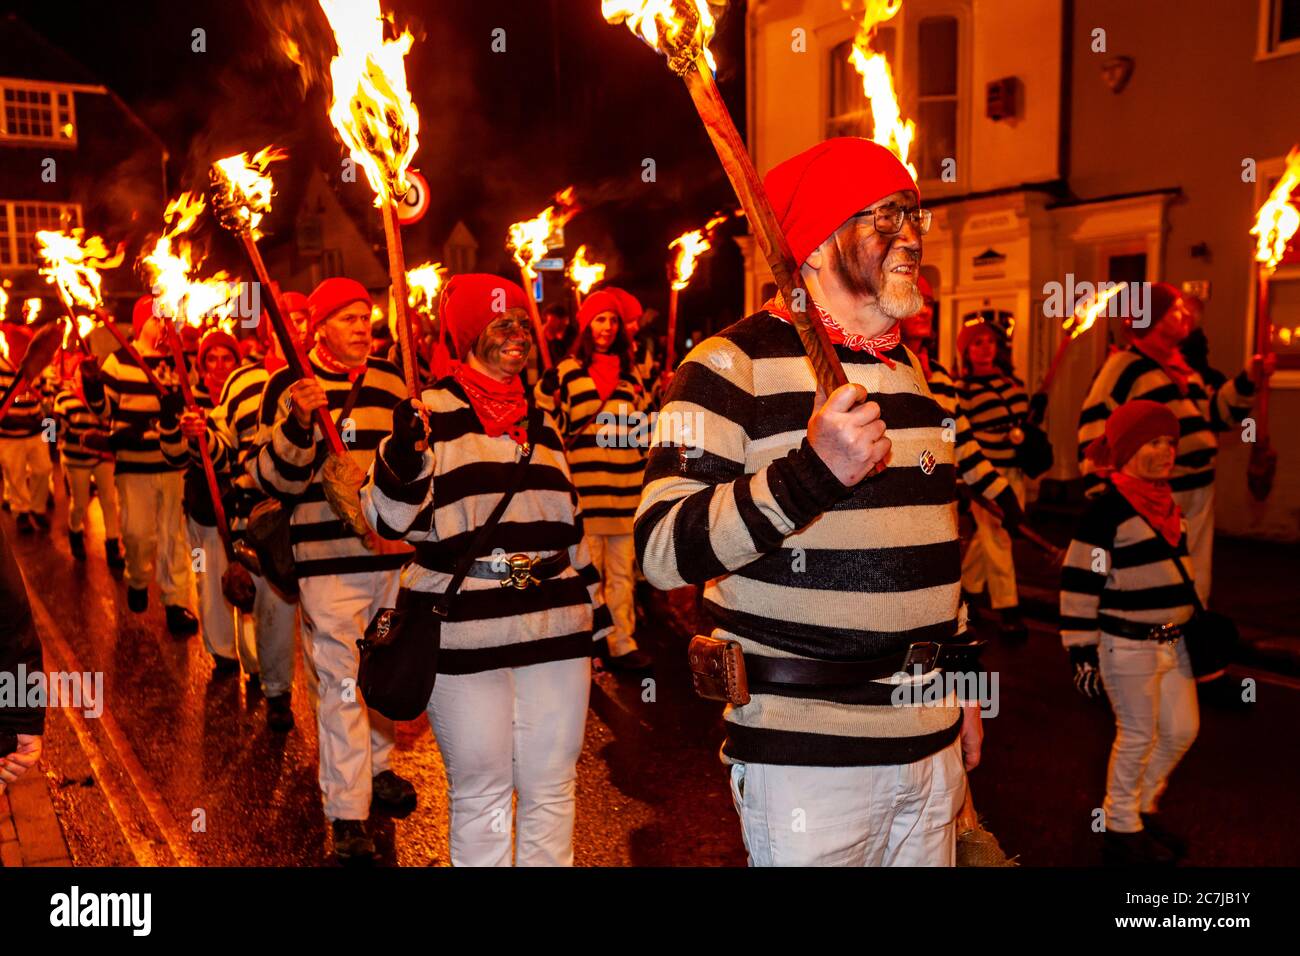 Local People Take Part In A Torchlight Street Procession During Bonfire Night (Guy Fawkes Night) Celebrations, Lewes, East Sussex, UK Stock Photo